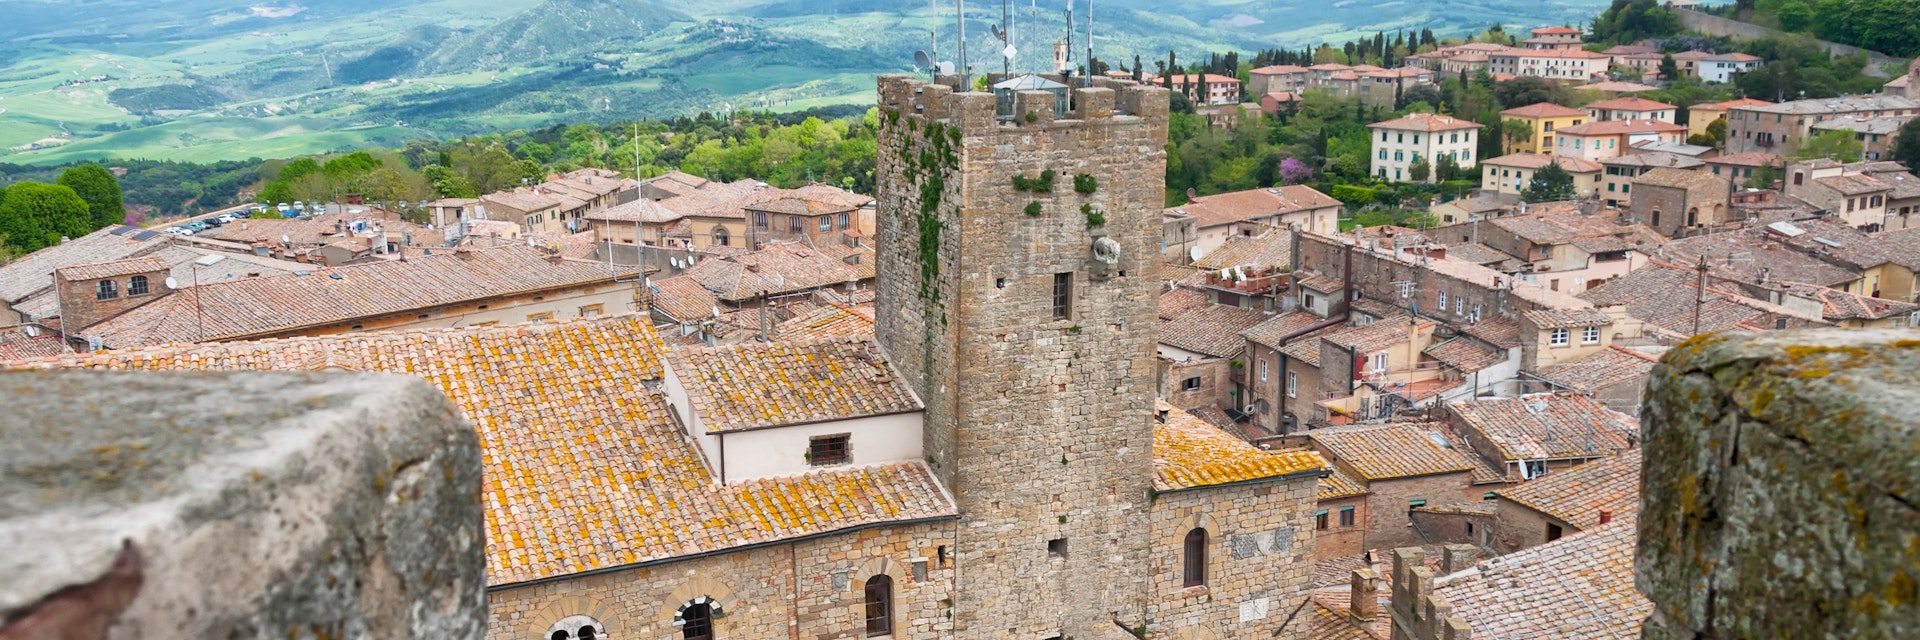 View of the town of Volterra, Tuscany, Italy